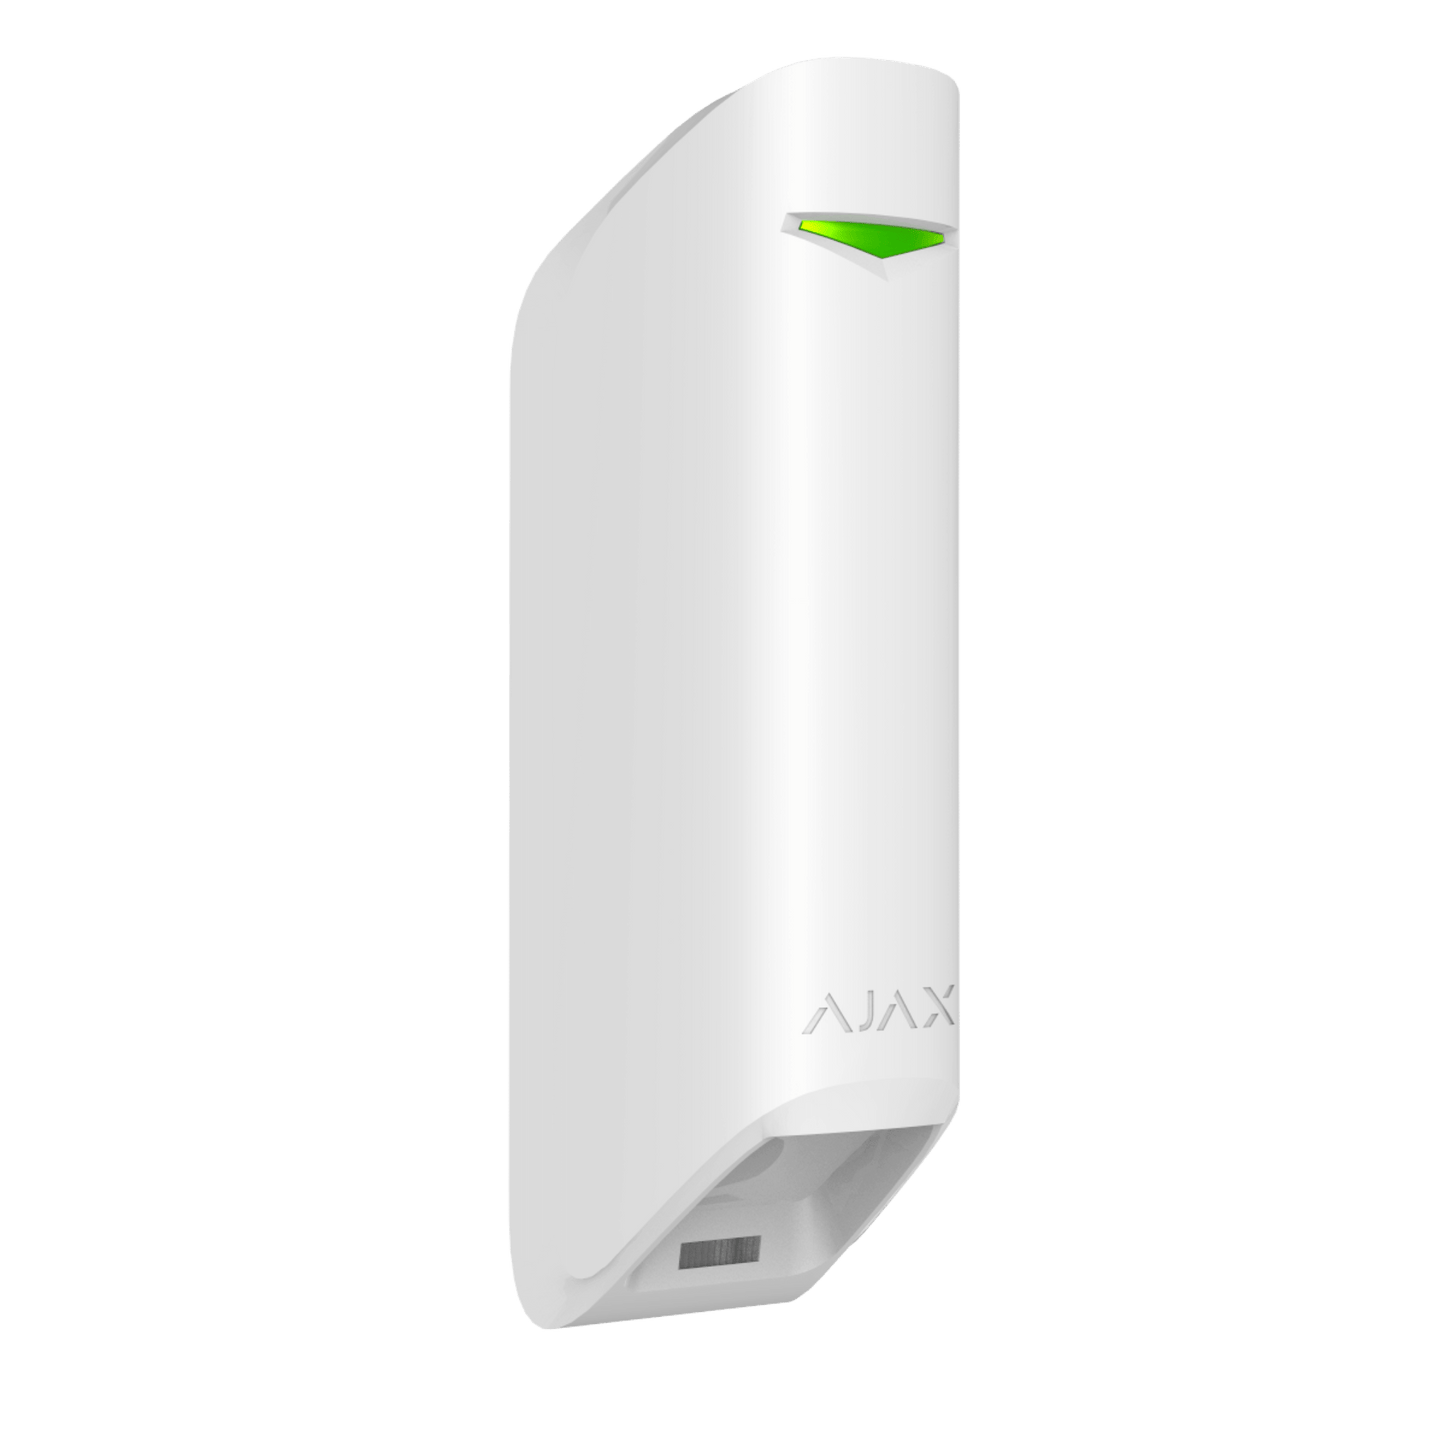 White Ajax MotionProtect Curtain detector a wireless motion detector for business and home security,  134 × 44 × 34 mm in size , 118grams in weight, Turned view of device